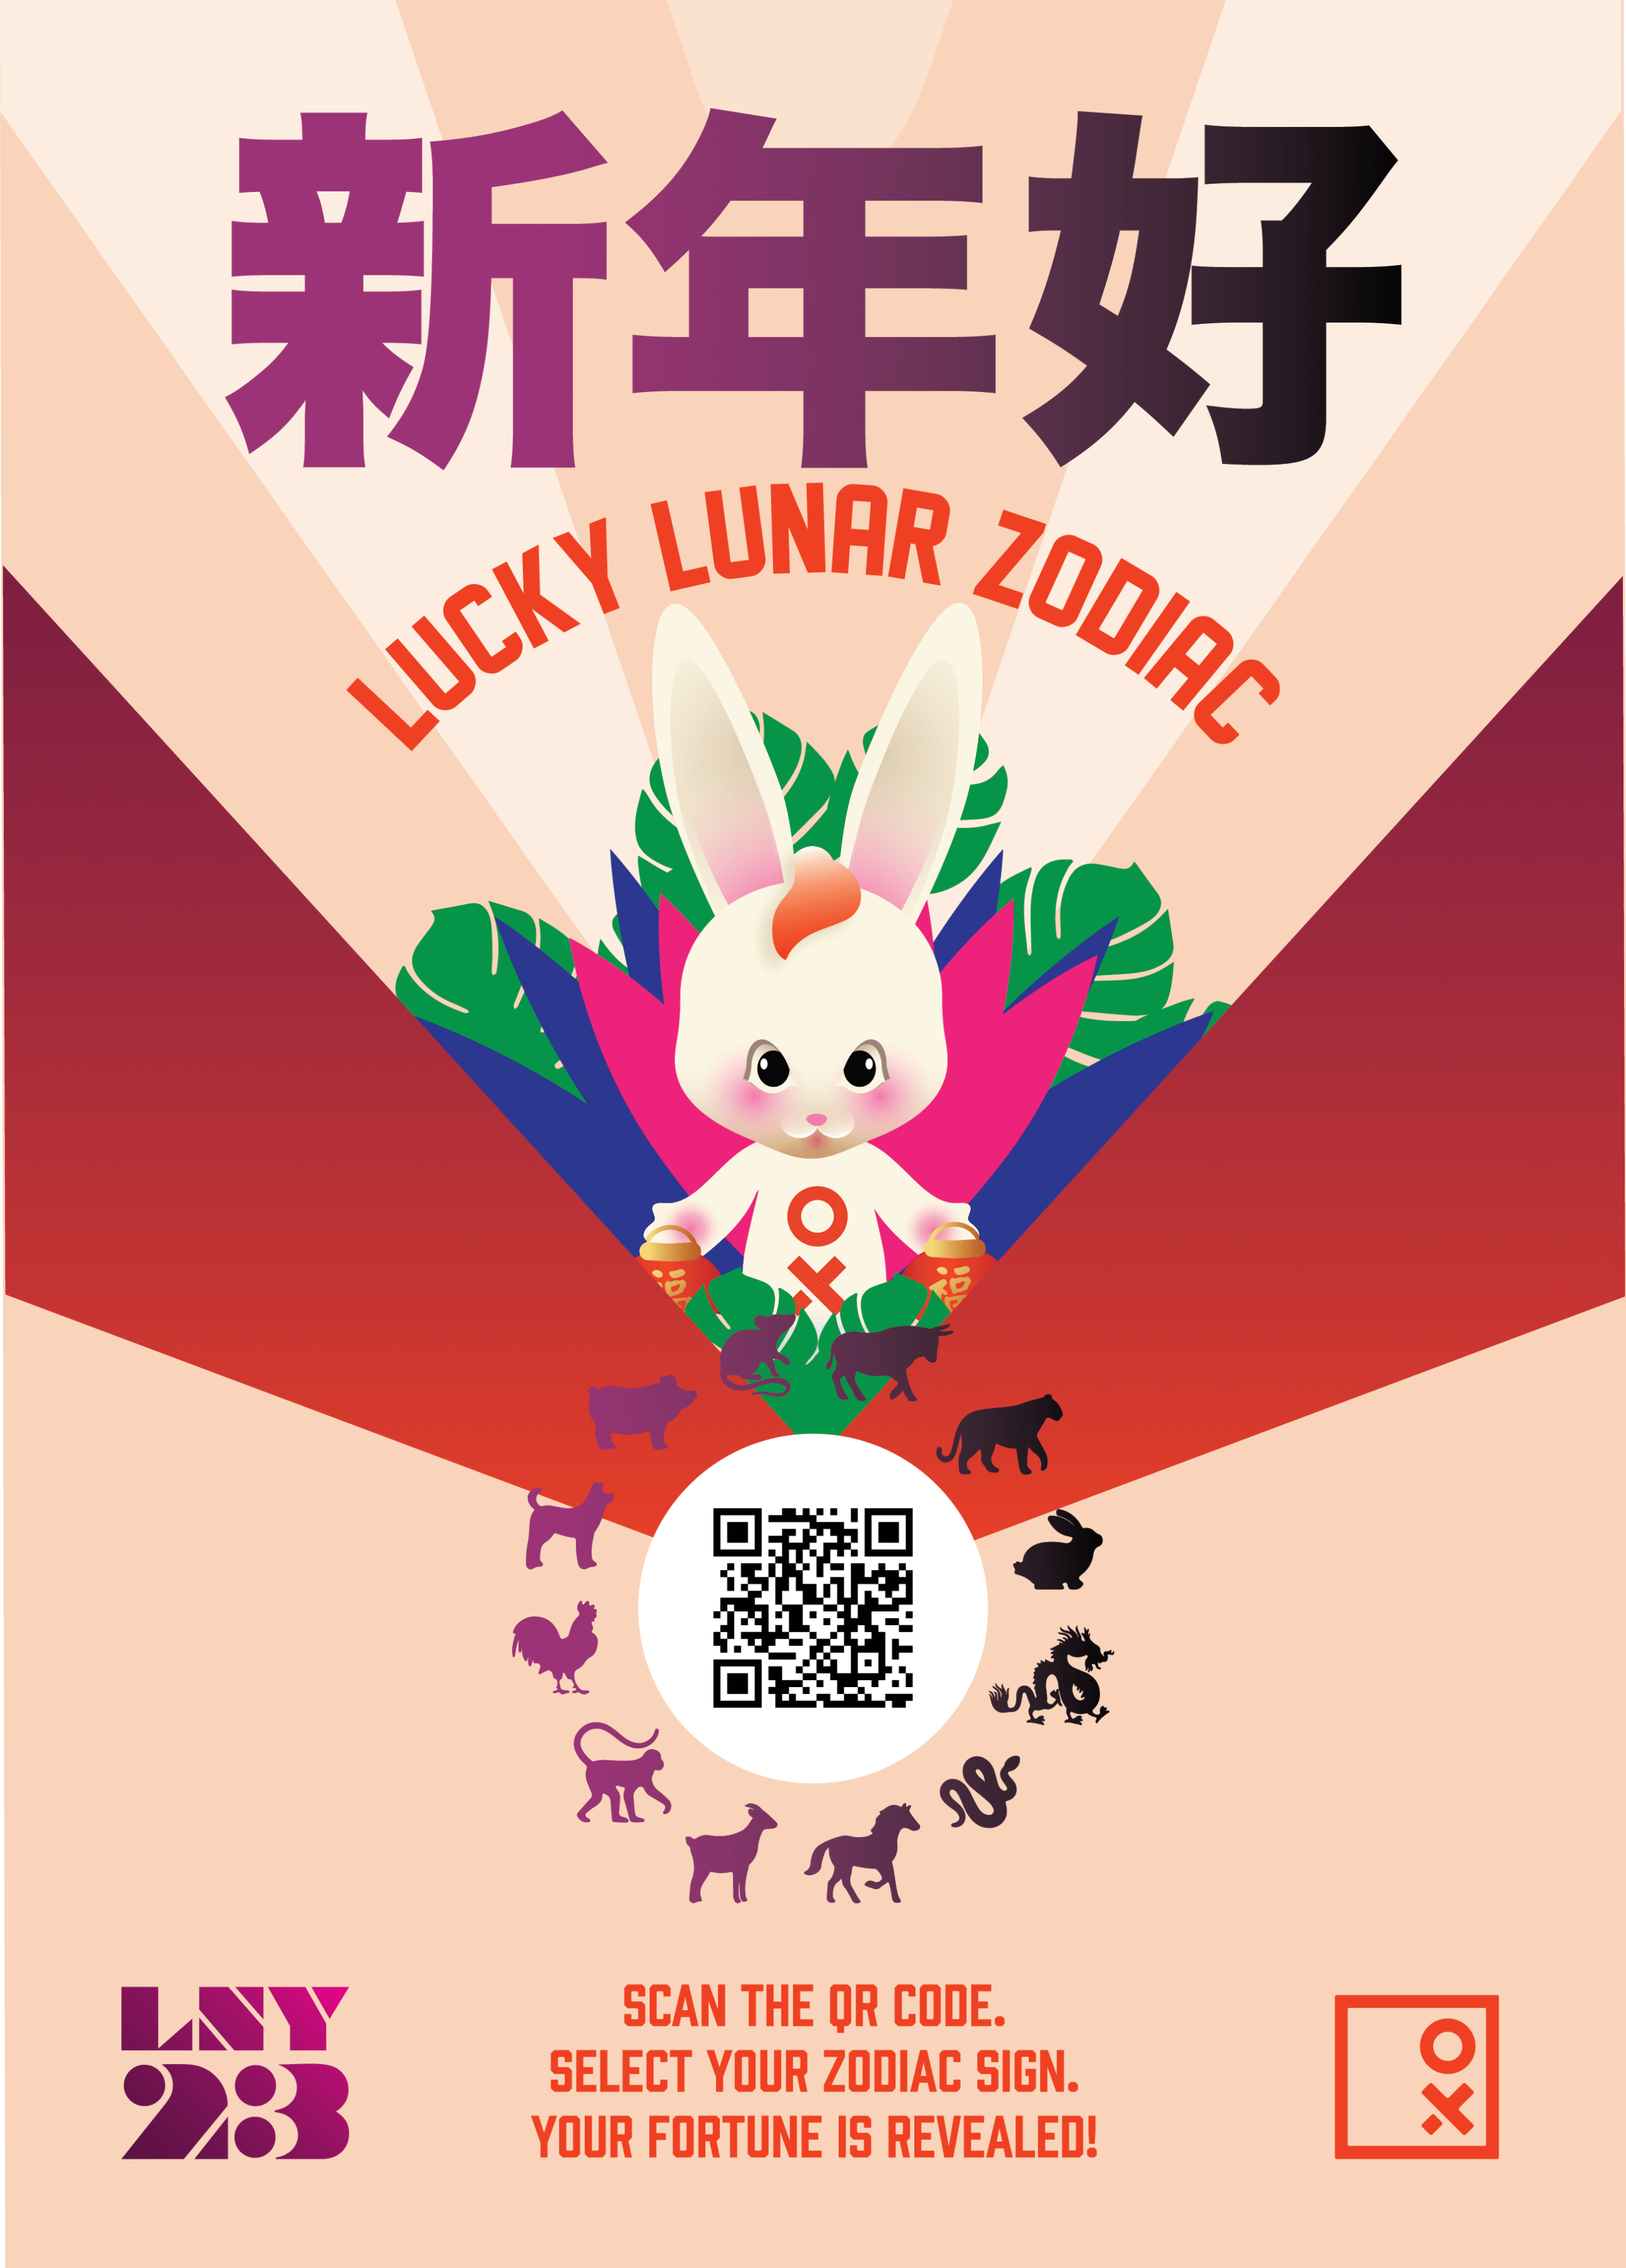 Digital art depicting an animated rabbit and scannable QR code to promote the Lucky Lunar Lunar New Year experiential brand activation for World Square Sydney